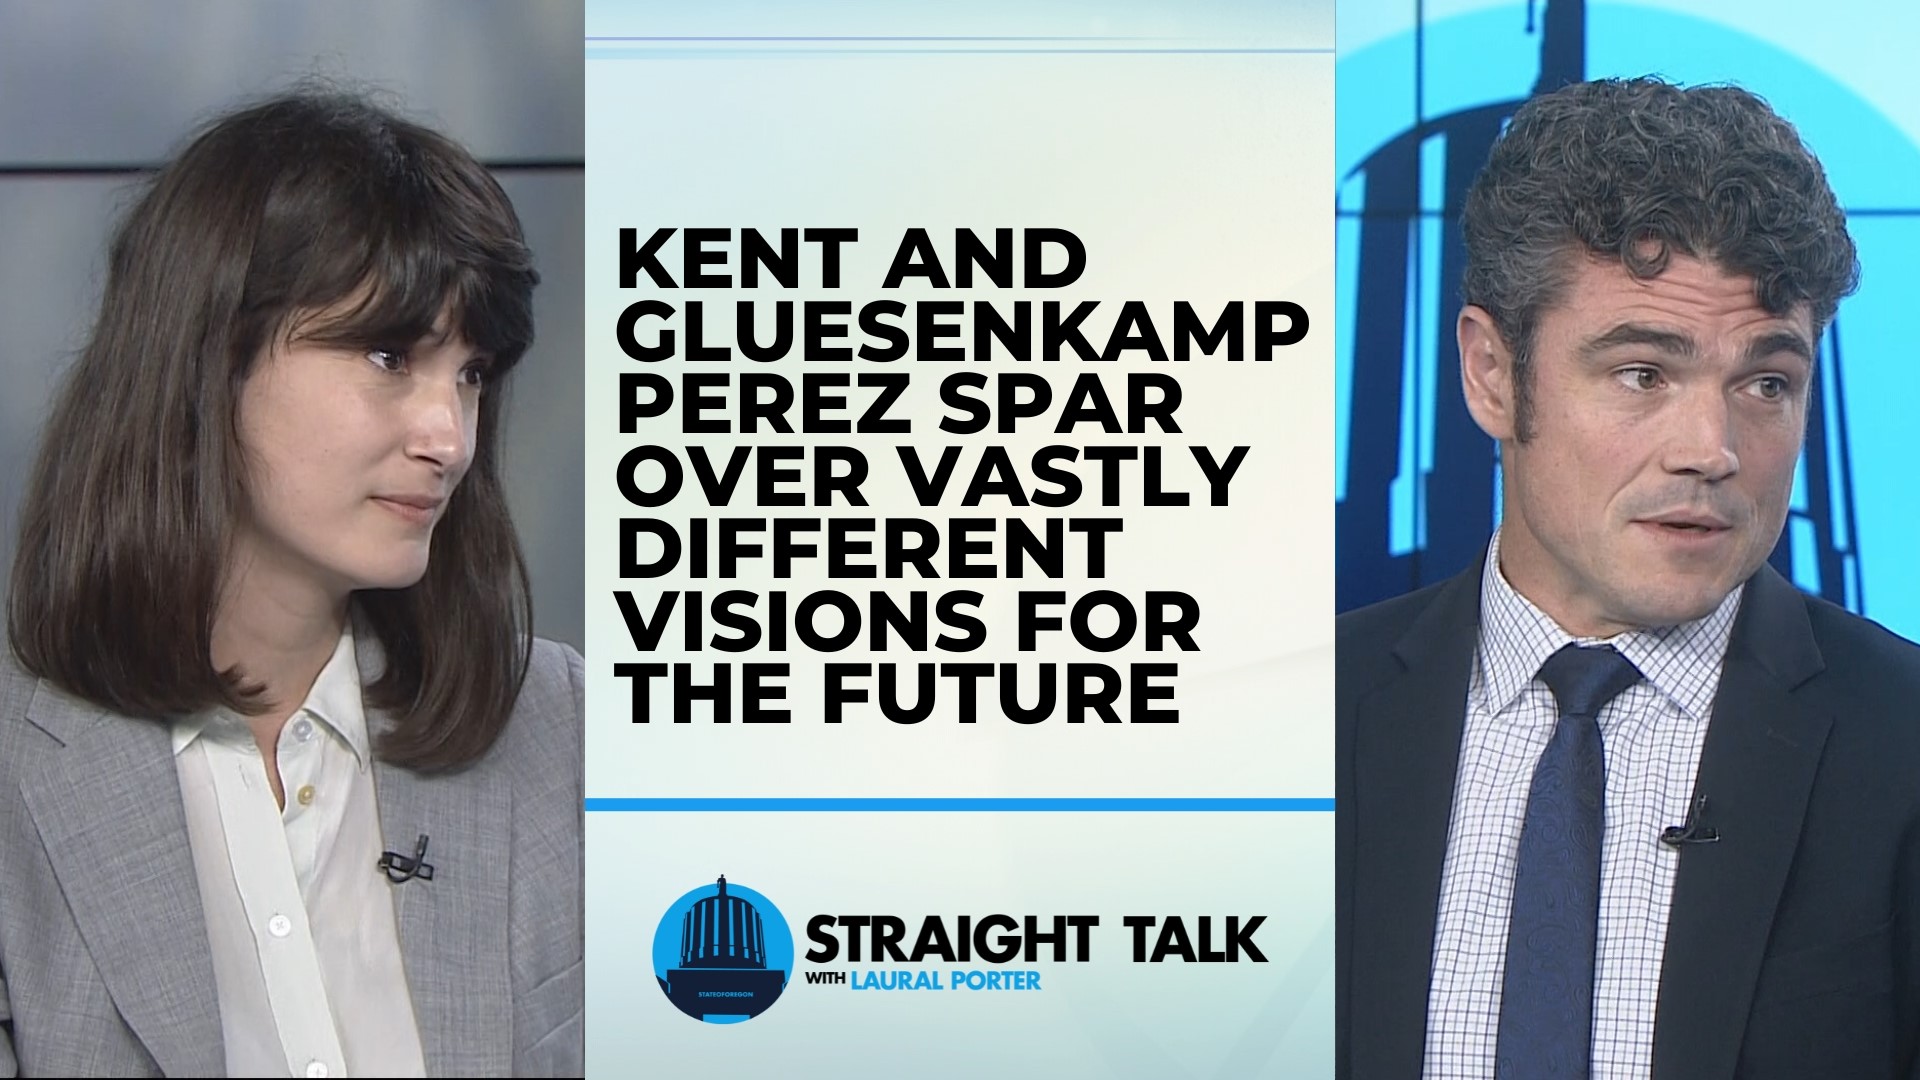 Republican Joe Kent said his main goal is to end one party rule while Democrat Marie Gluesenkamp Perez said she'll focus on small businesses and manufacturing jobs.